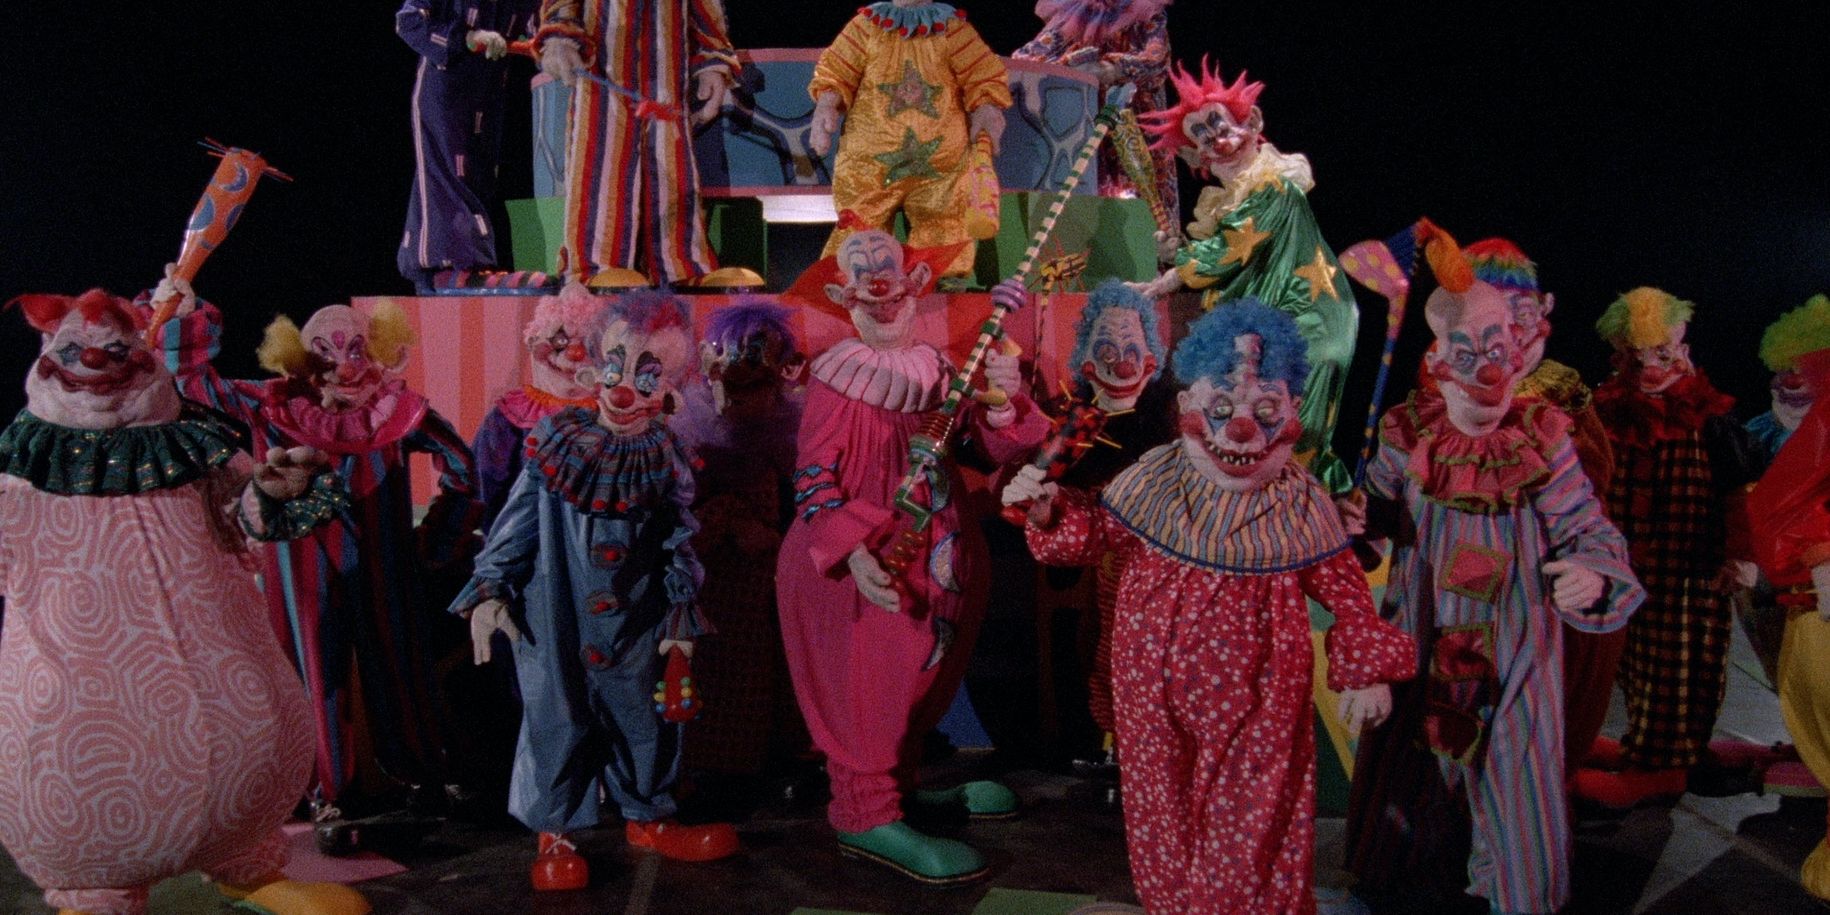 The cast of killer clowns from the 1988 movie Killer Klowns From Outer Space.